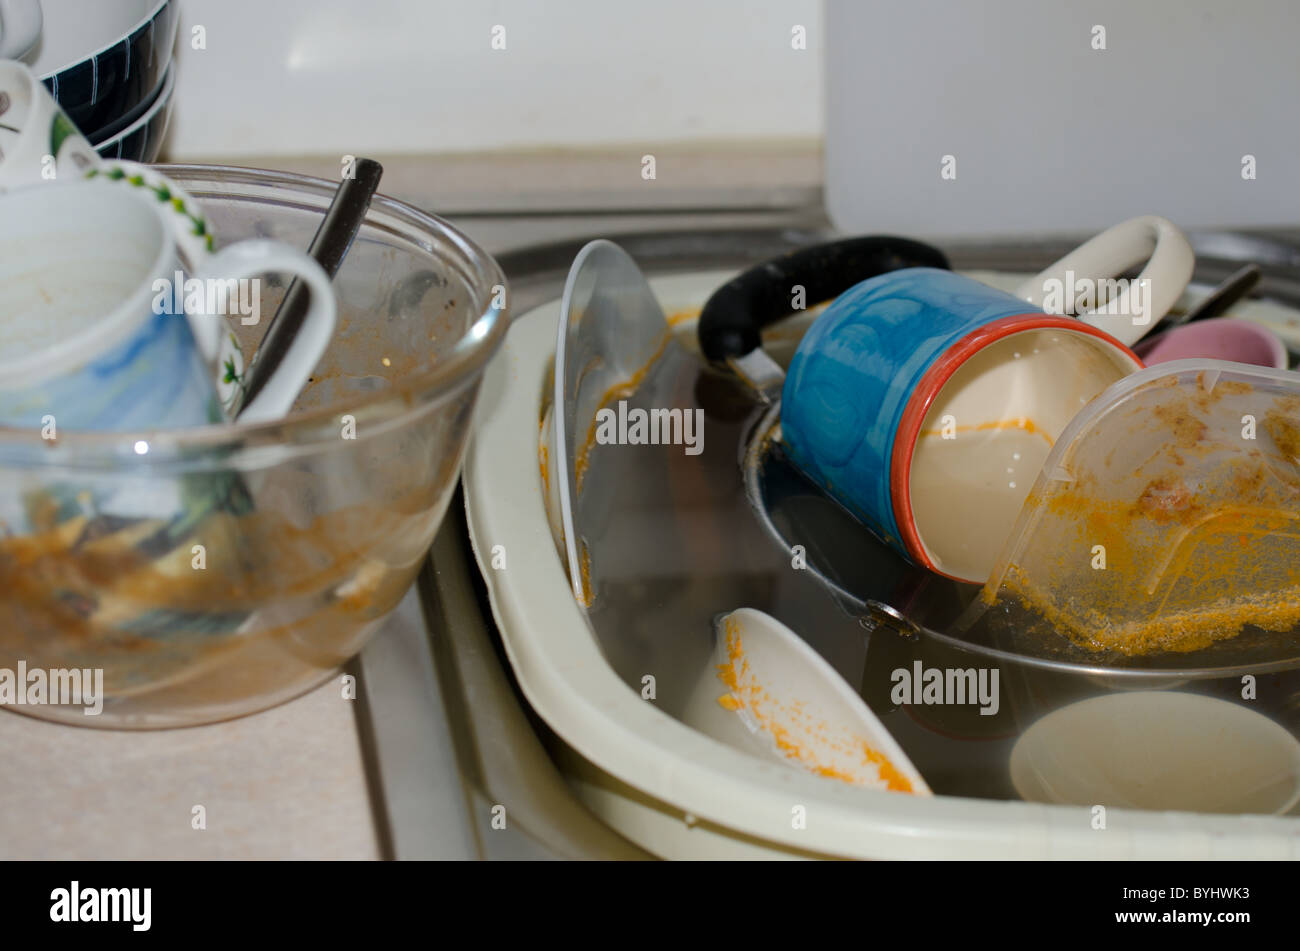 Sink Full Of Dirty Dishes High Resolution Stock Photography and Images ...